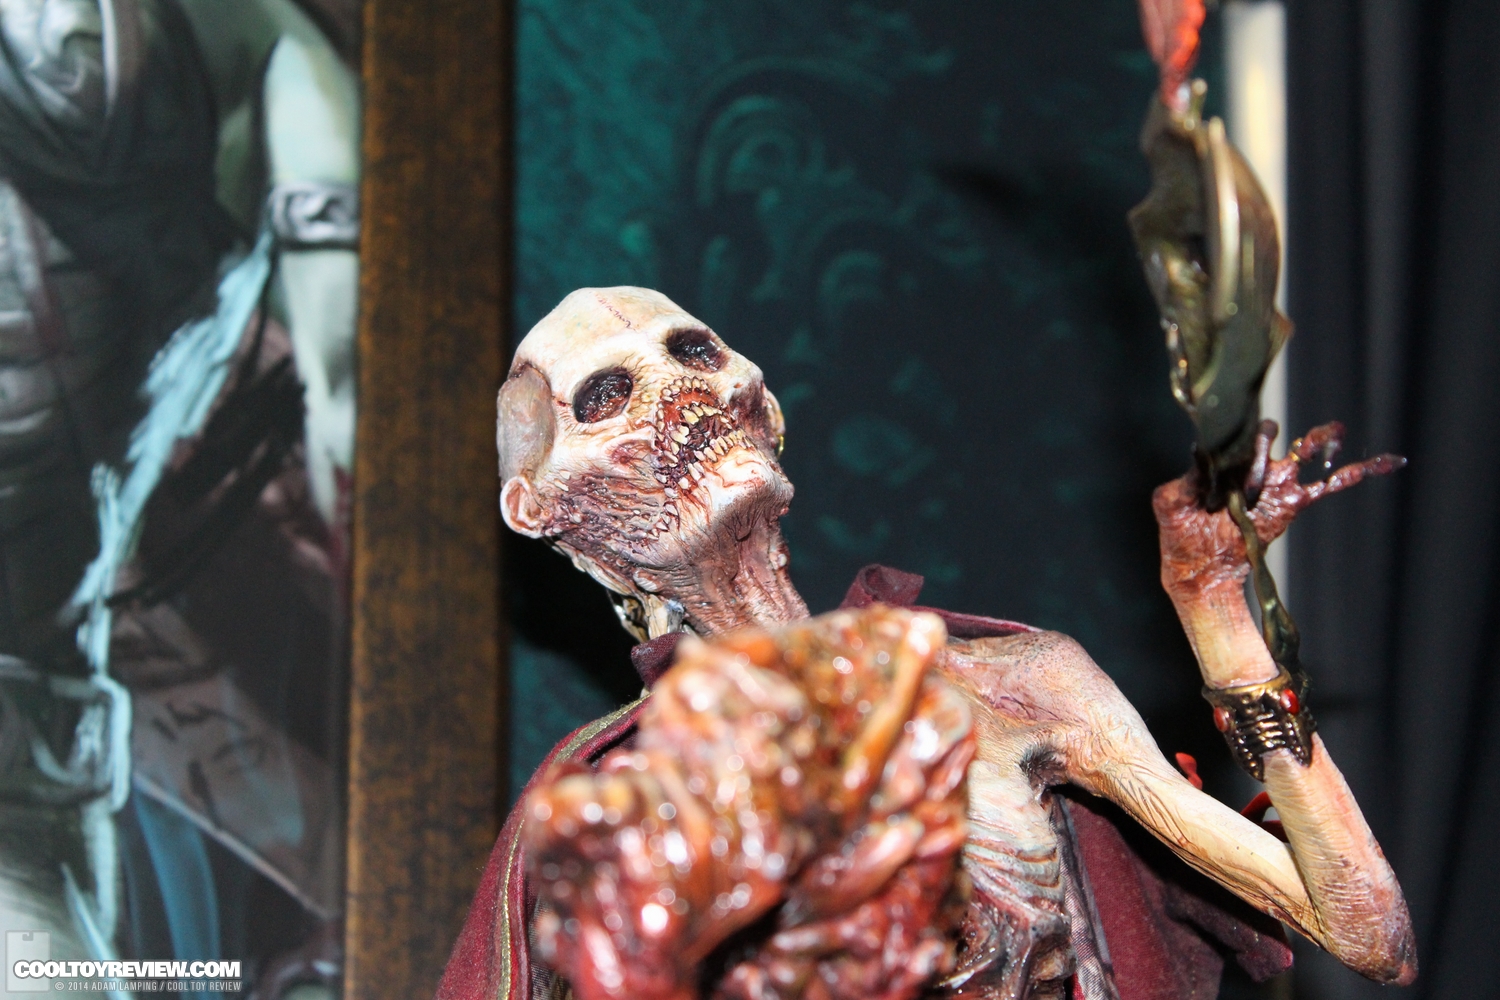 san-diego-comic-con-2014-sideshow-collectibles-court-of-the-dead-020.JPG